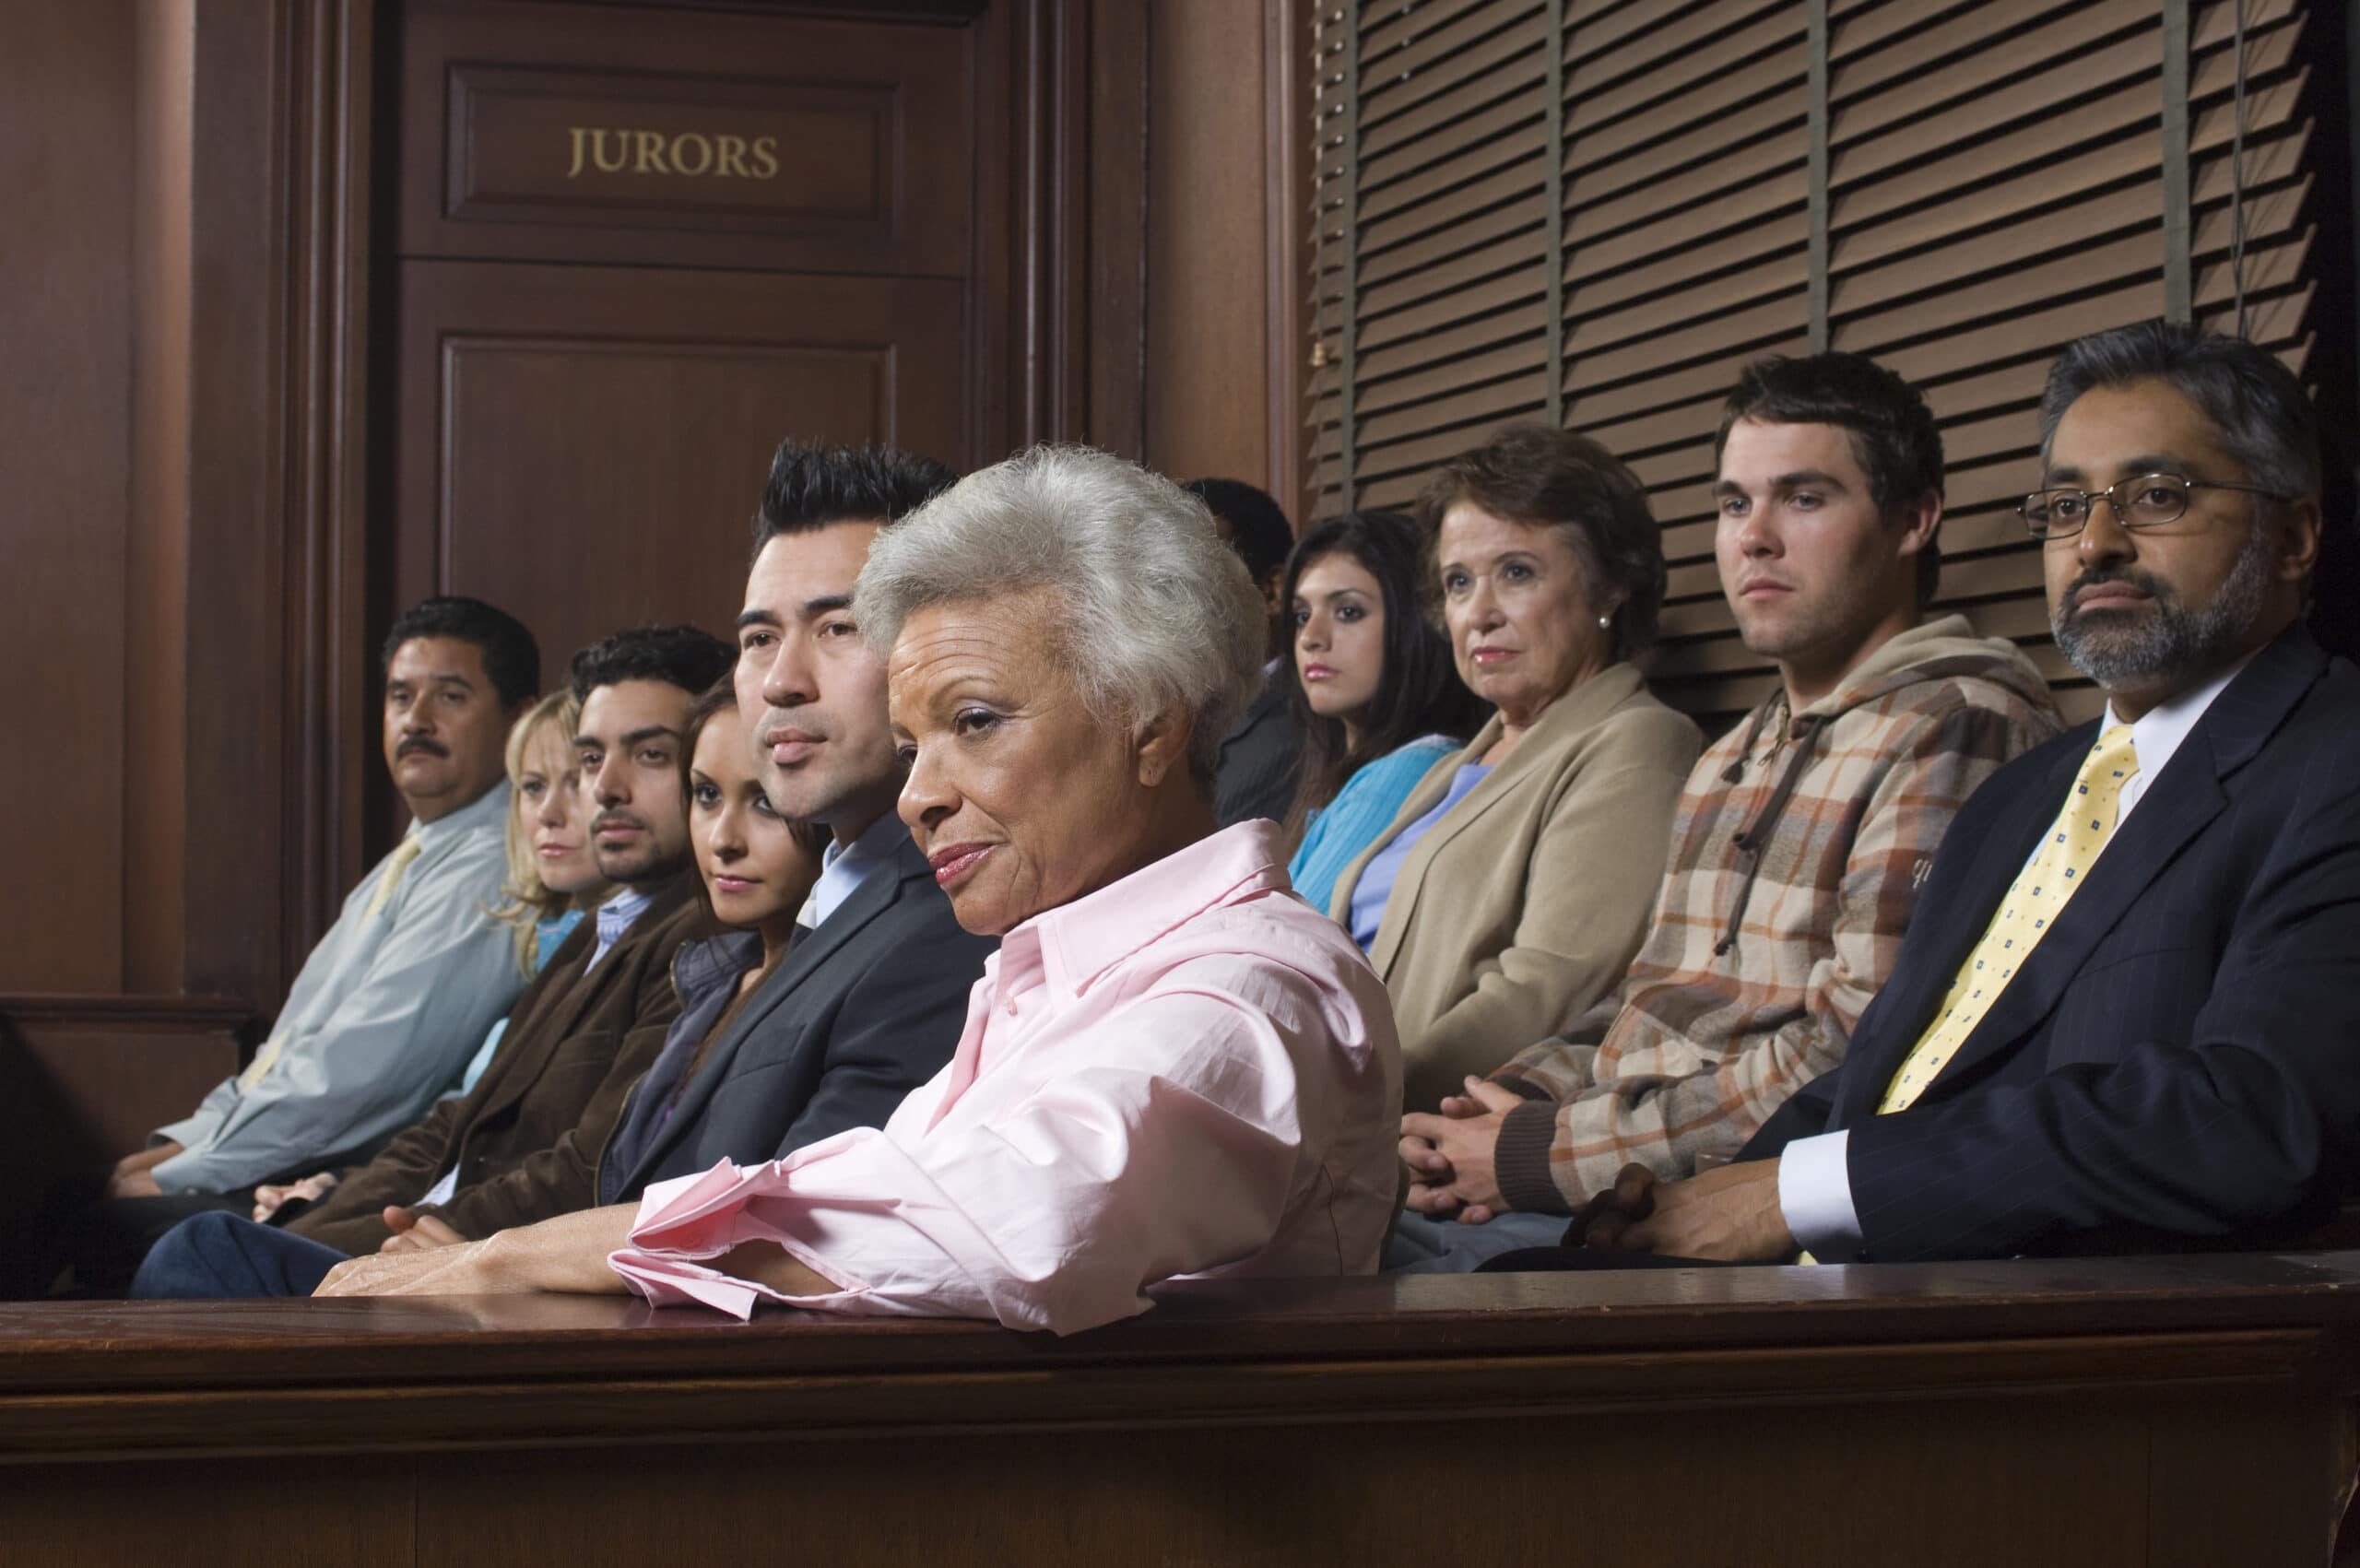 When Should A Juror Be Struck For Cause?